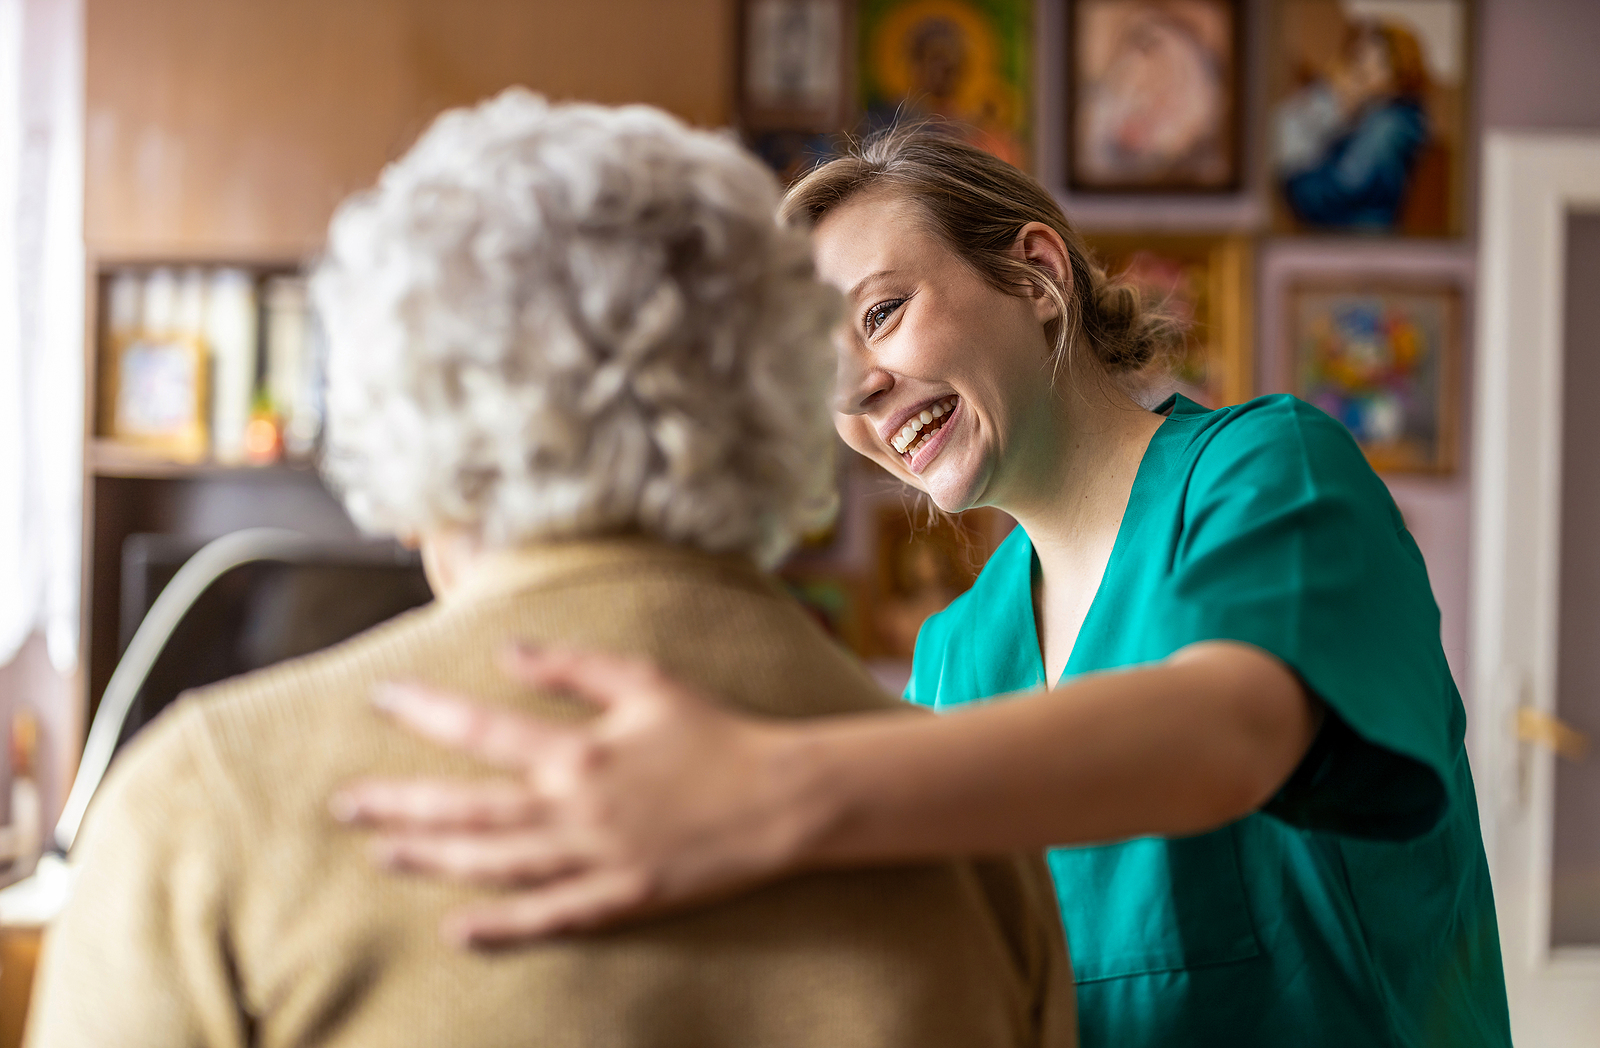 Companion Care At Home Reduces Stress For Seniors